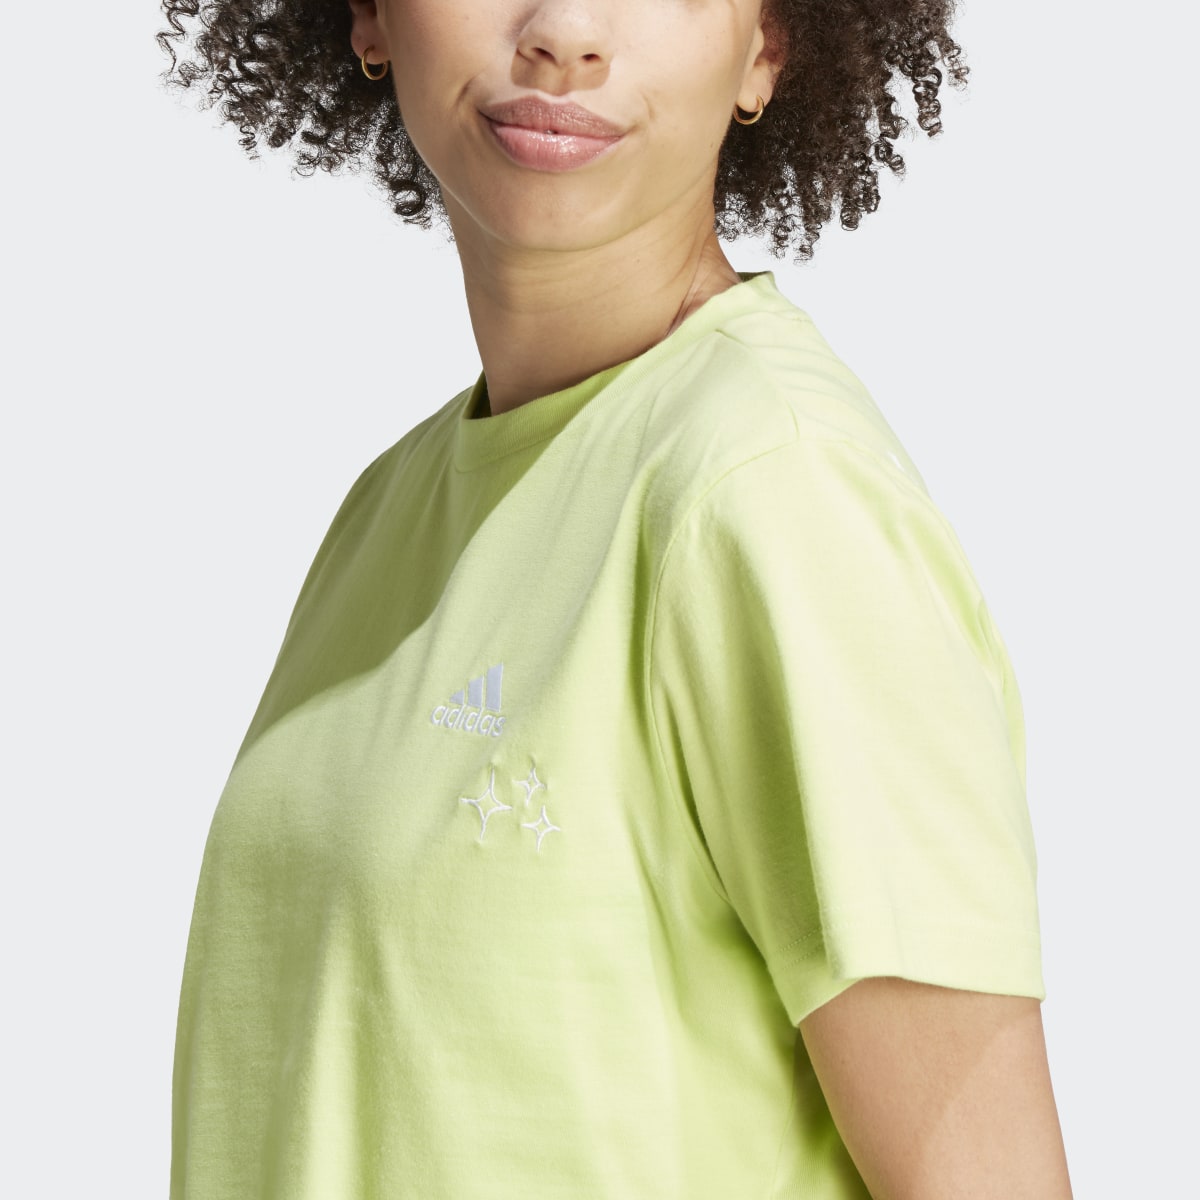 Adidas Scribble Embroidery Crop Tee. 7